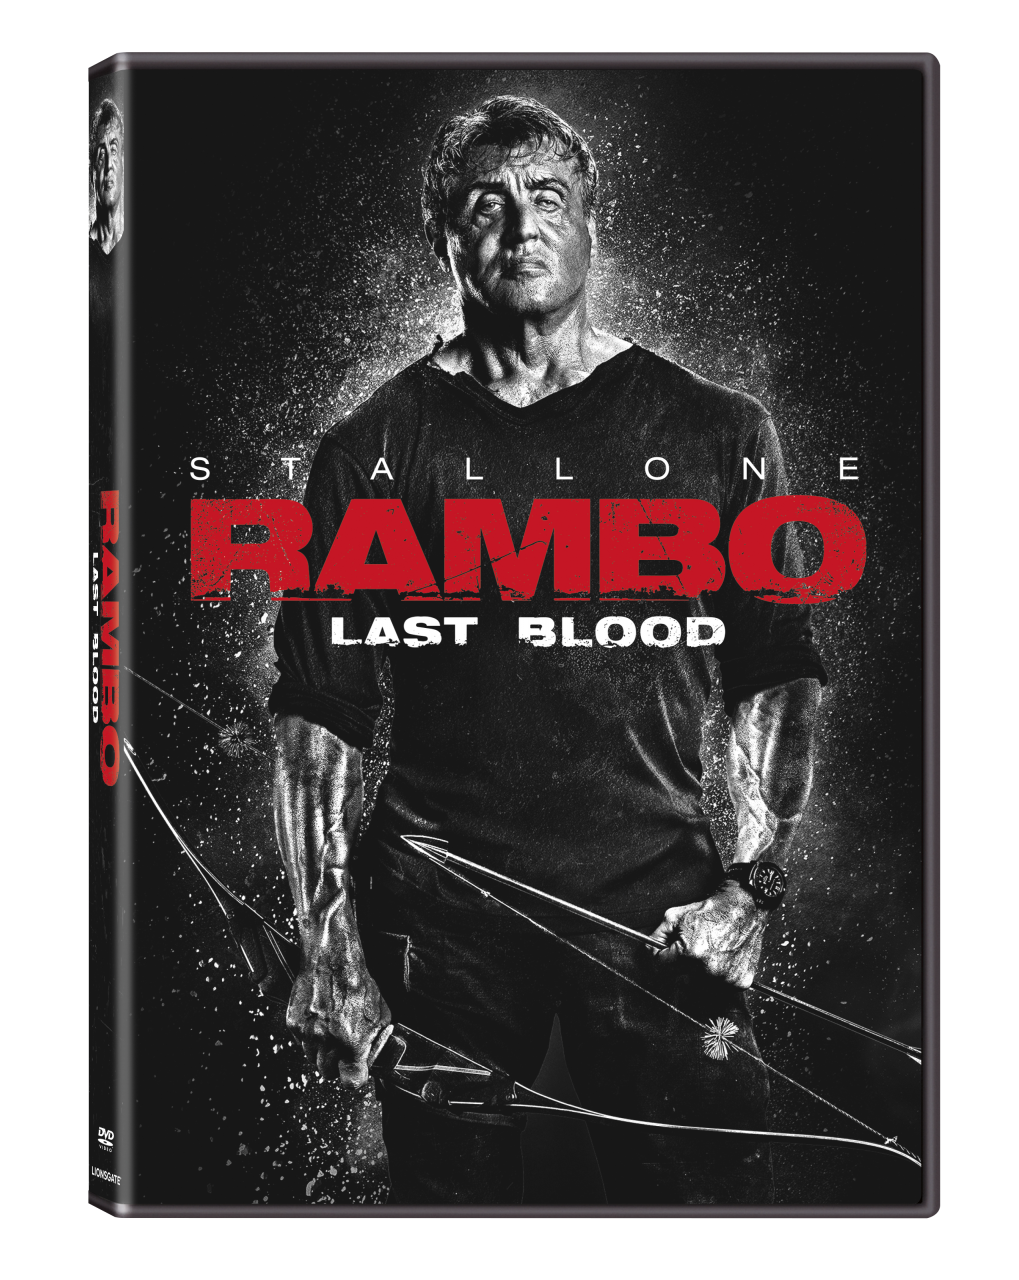 Rambo: Last Blood DVD cover (Lionsgate Home Entertainment)